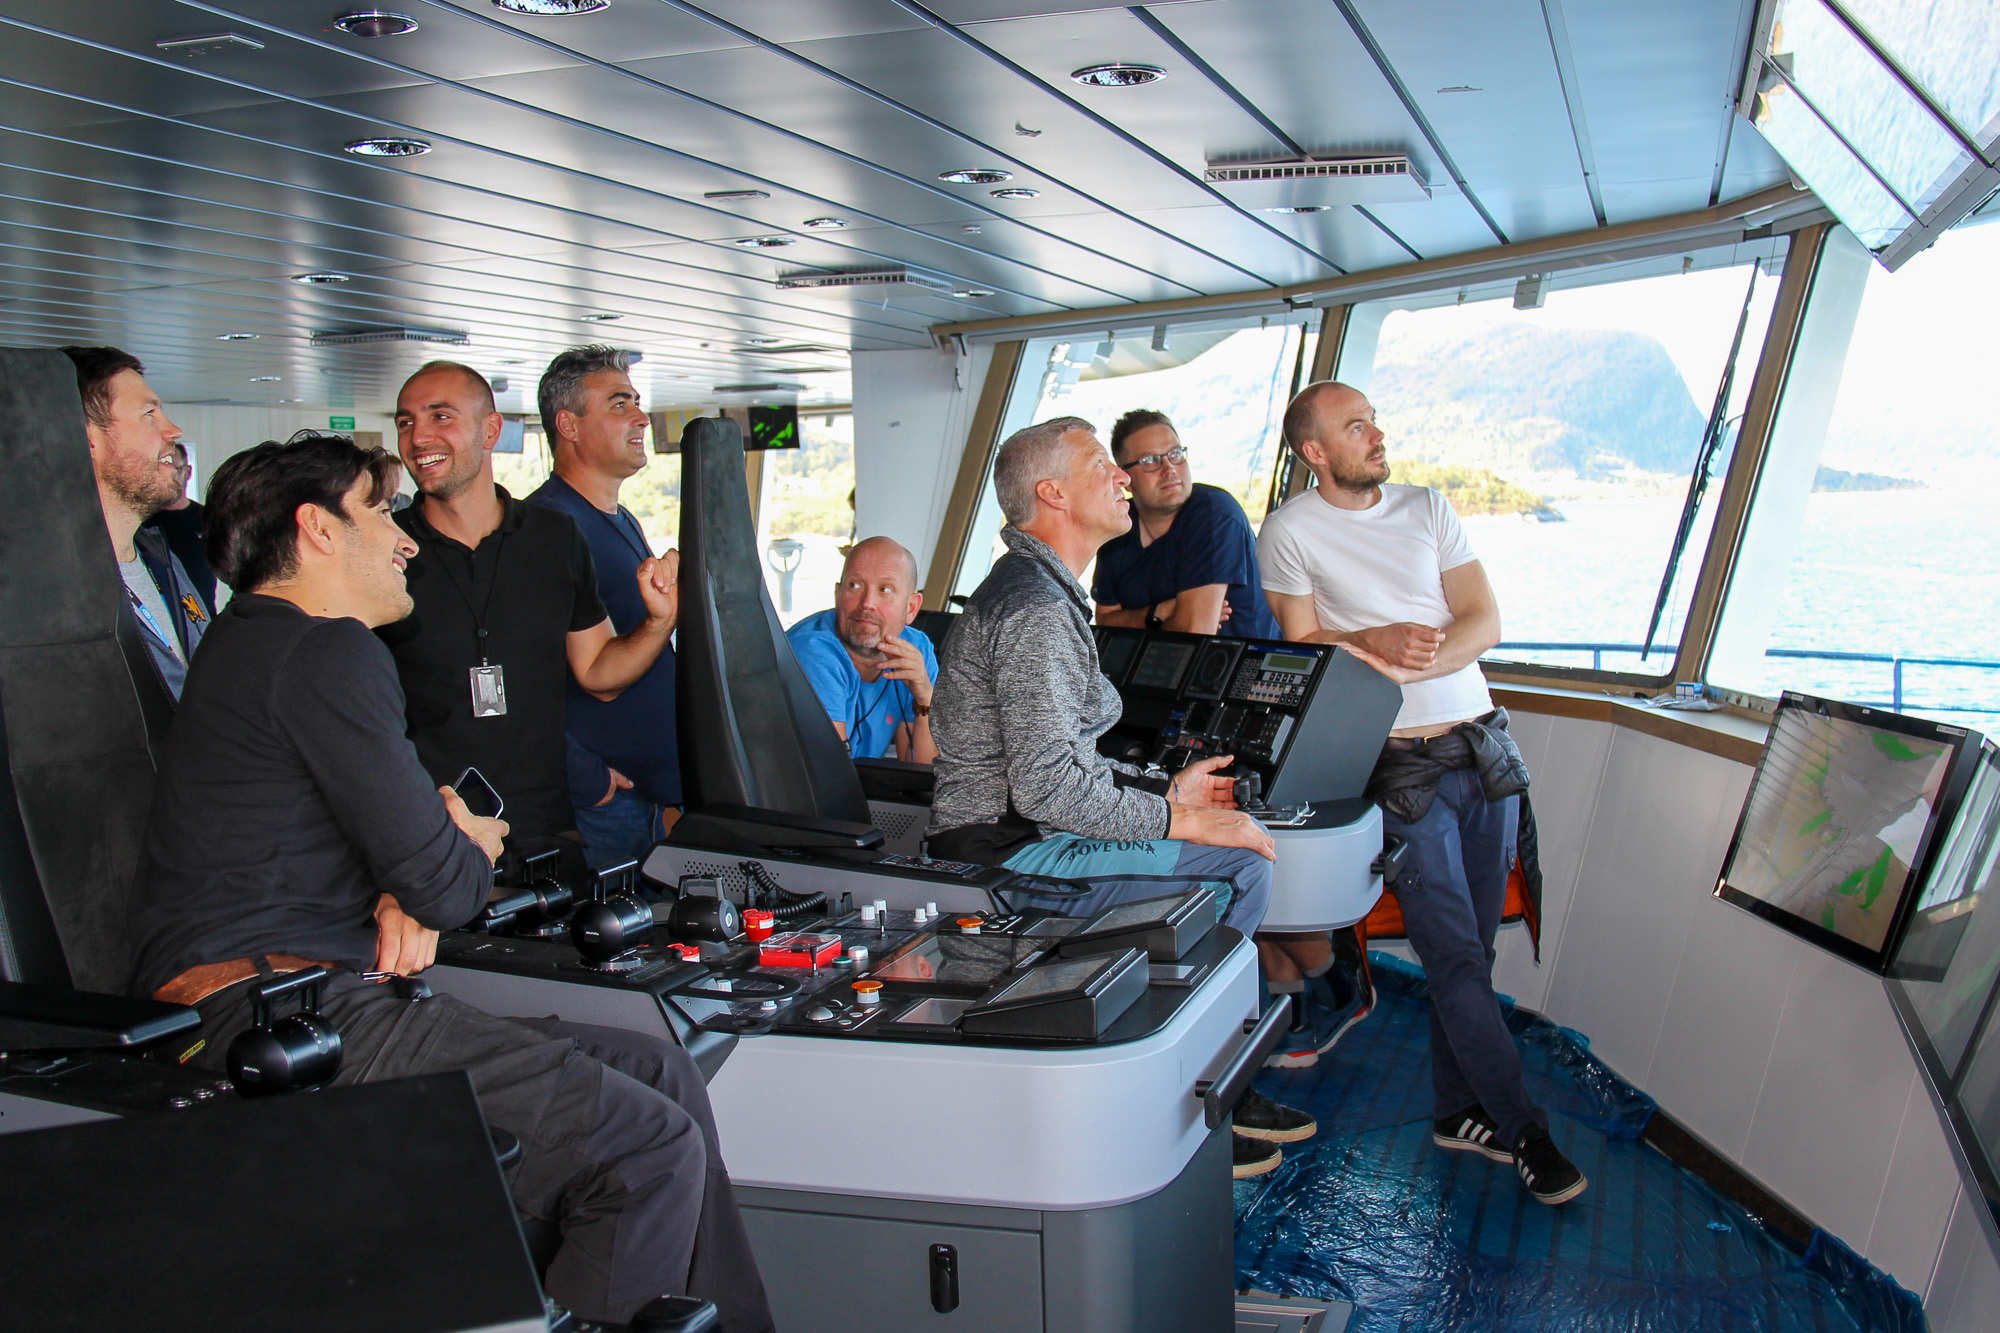 There is much focus on the test results during the sea trial.